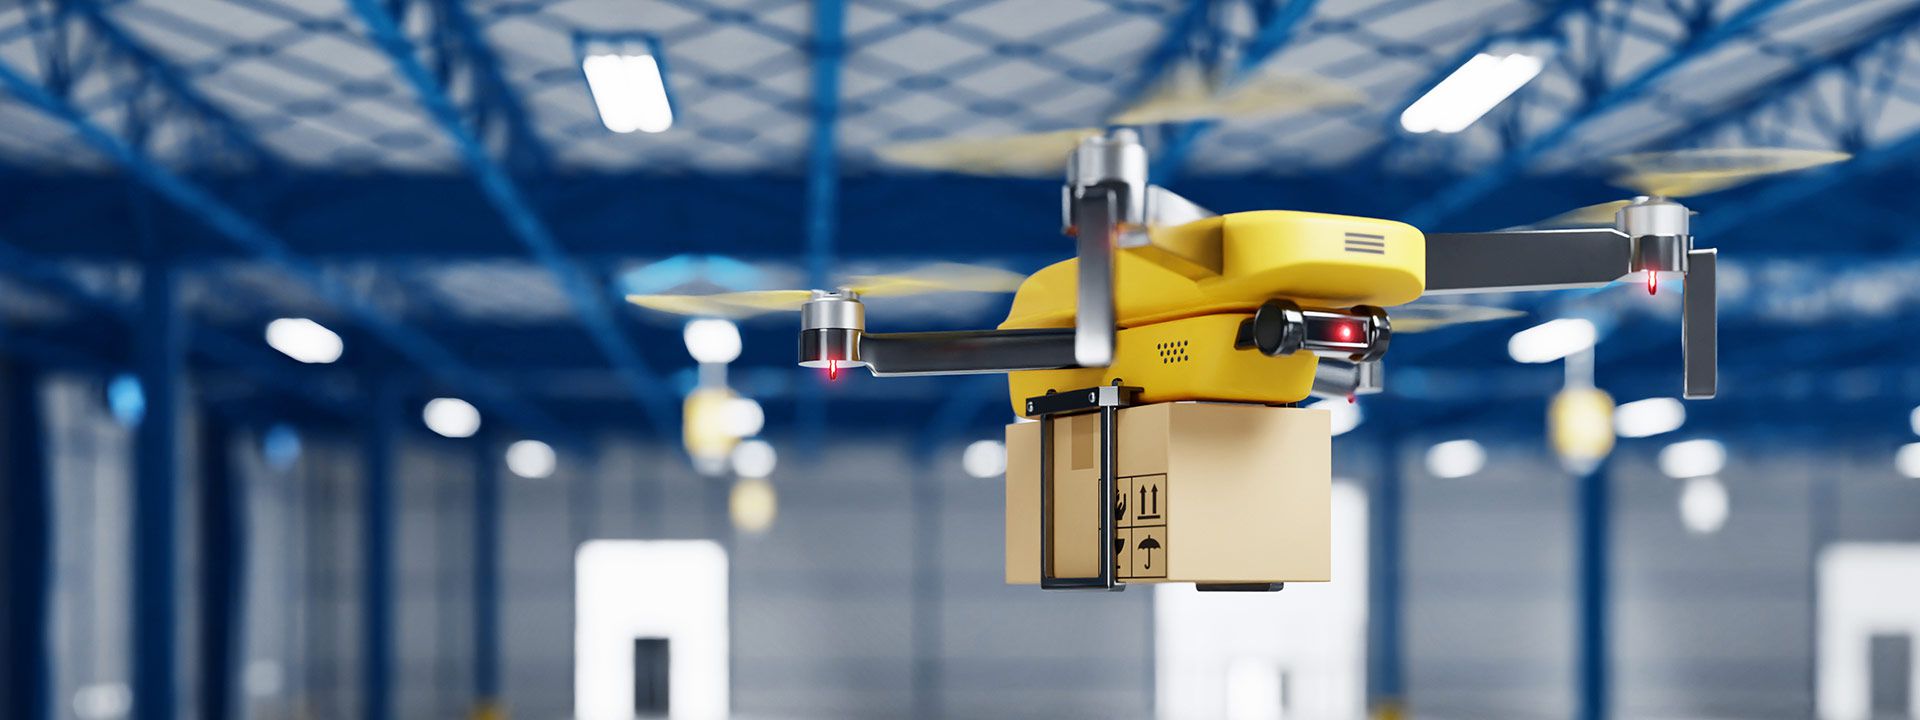 IKEA now uses 100 drones for inventory operations